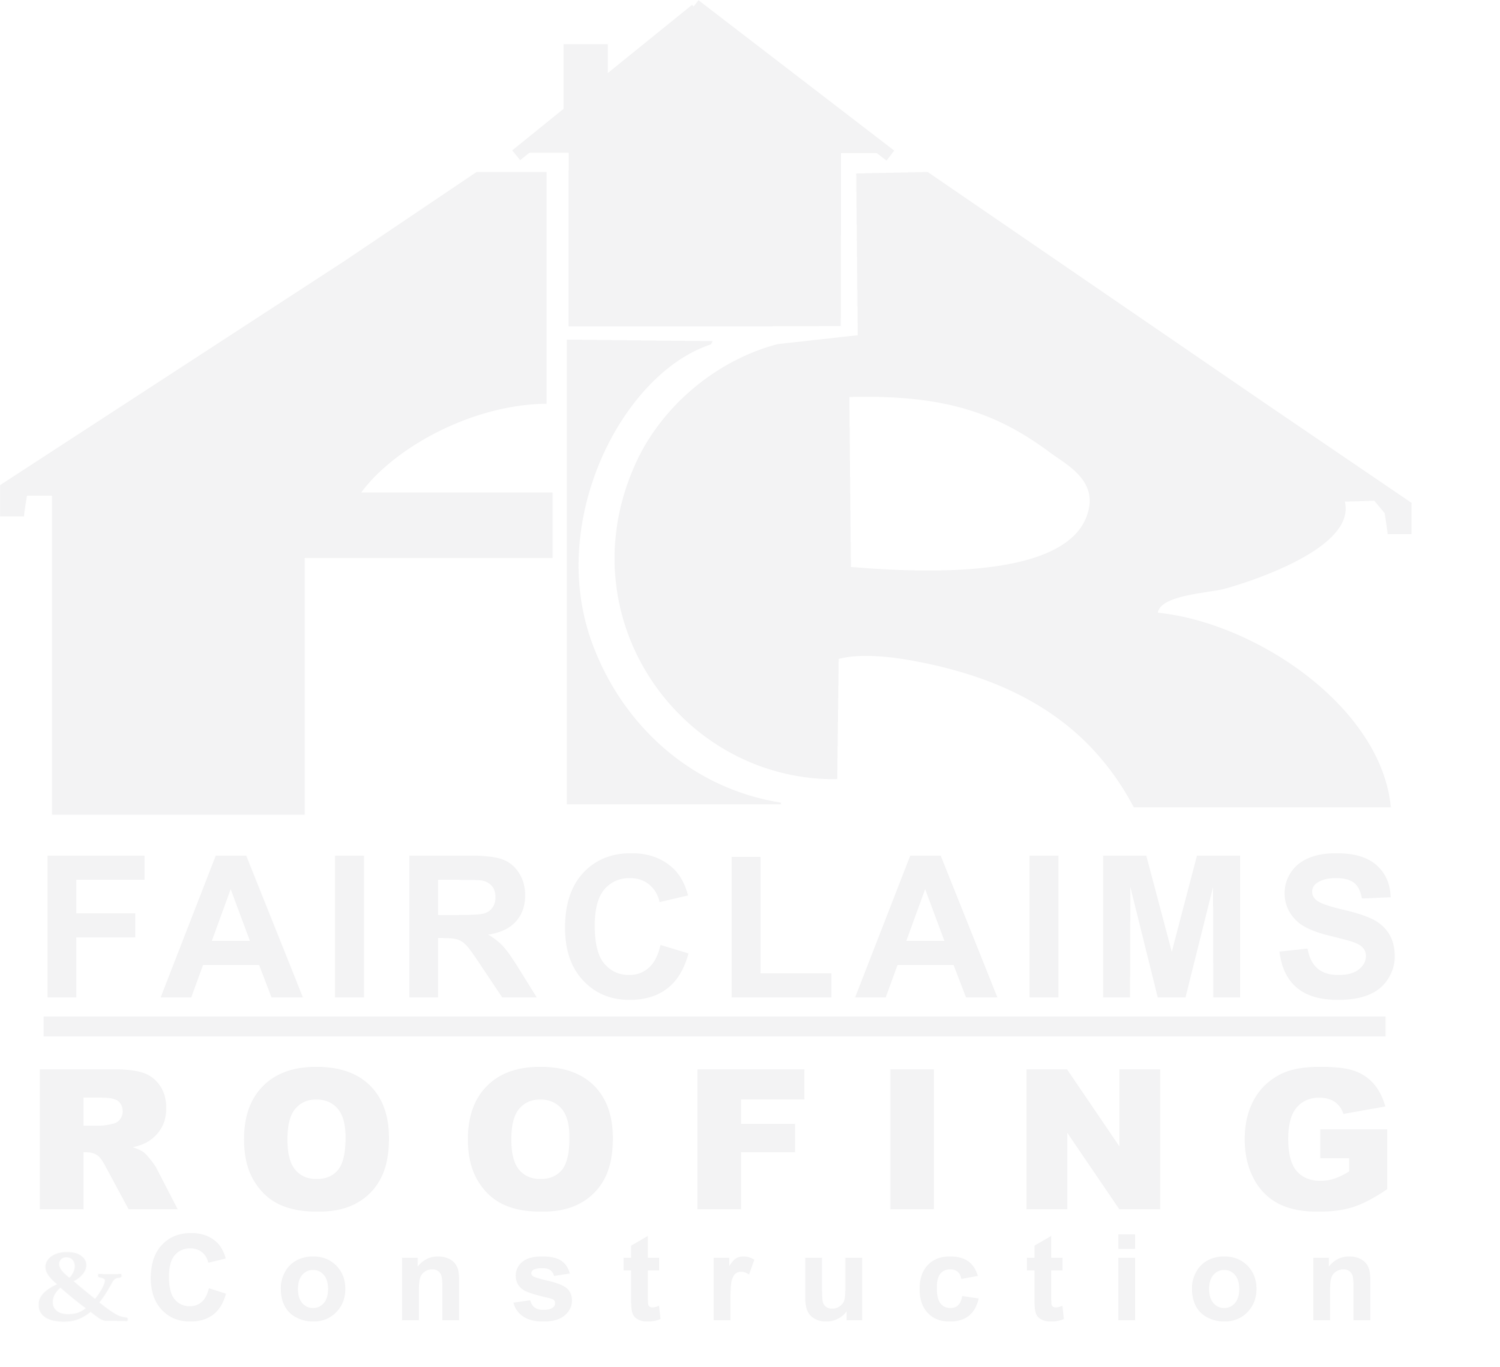 Fairclaims Roofing & Construction